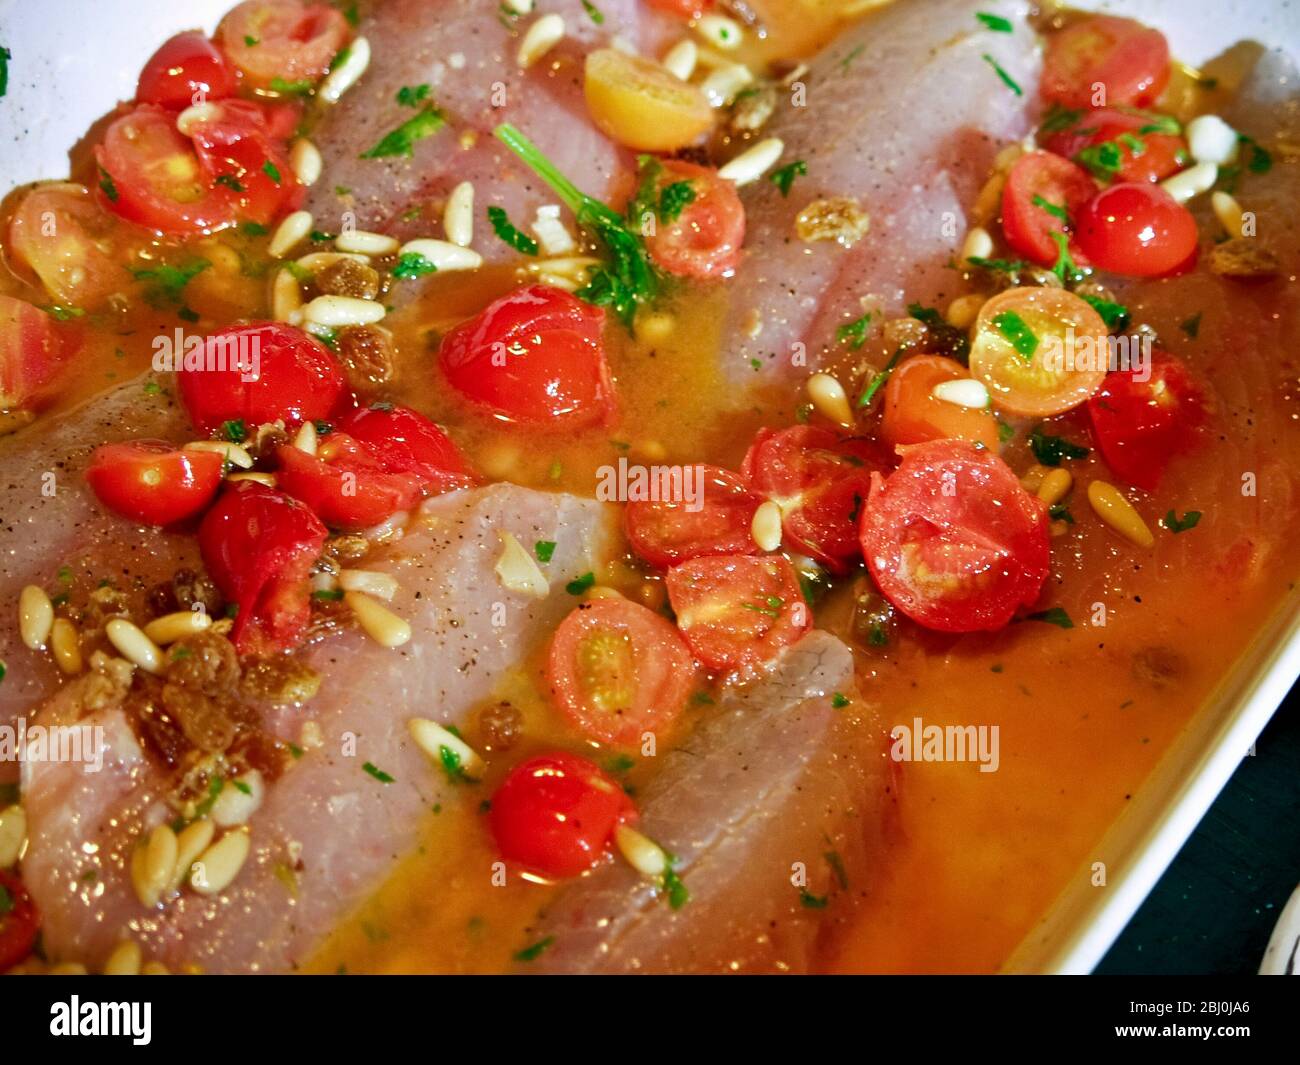 Fillets of seabass with pinenuts, parsley, cherry tomatoes and olive oil, before being put in oven. - Stock Photo